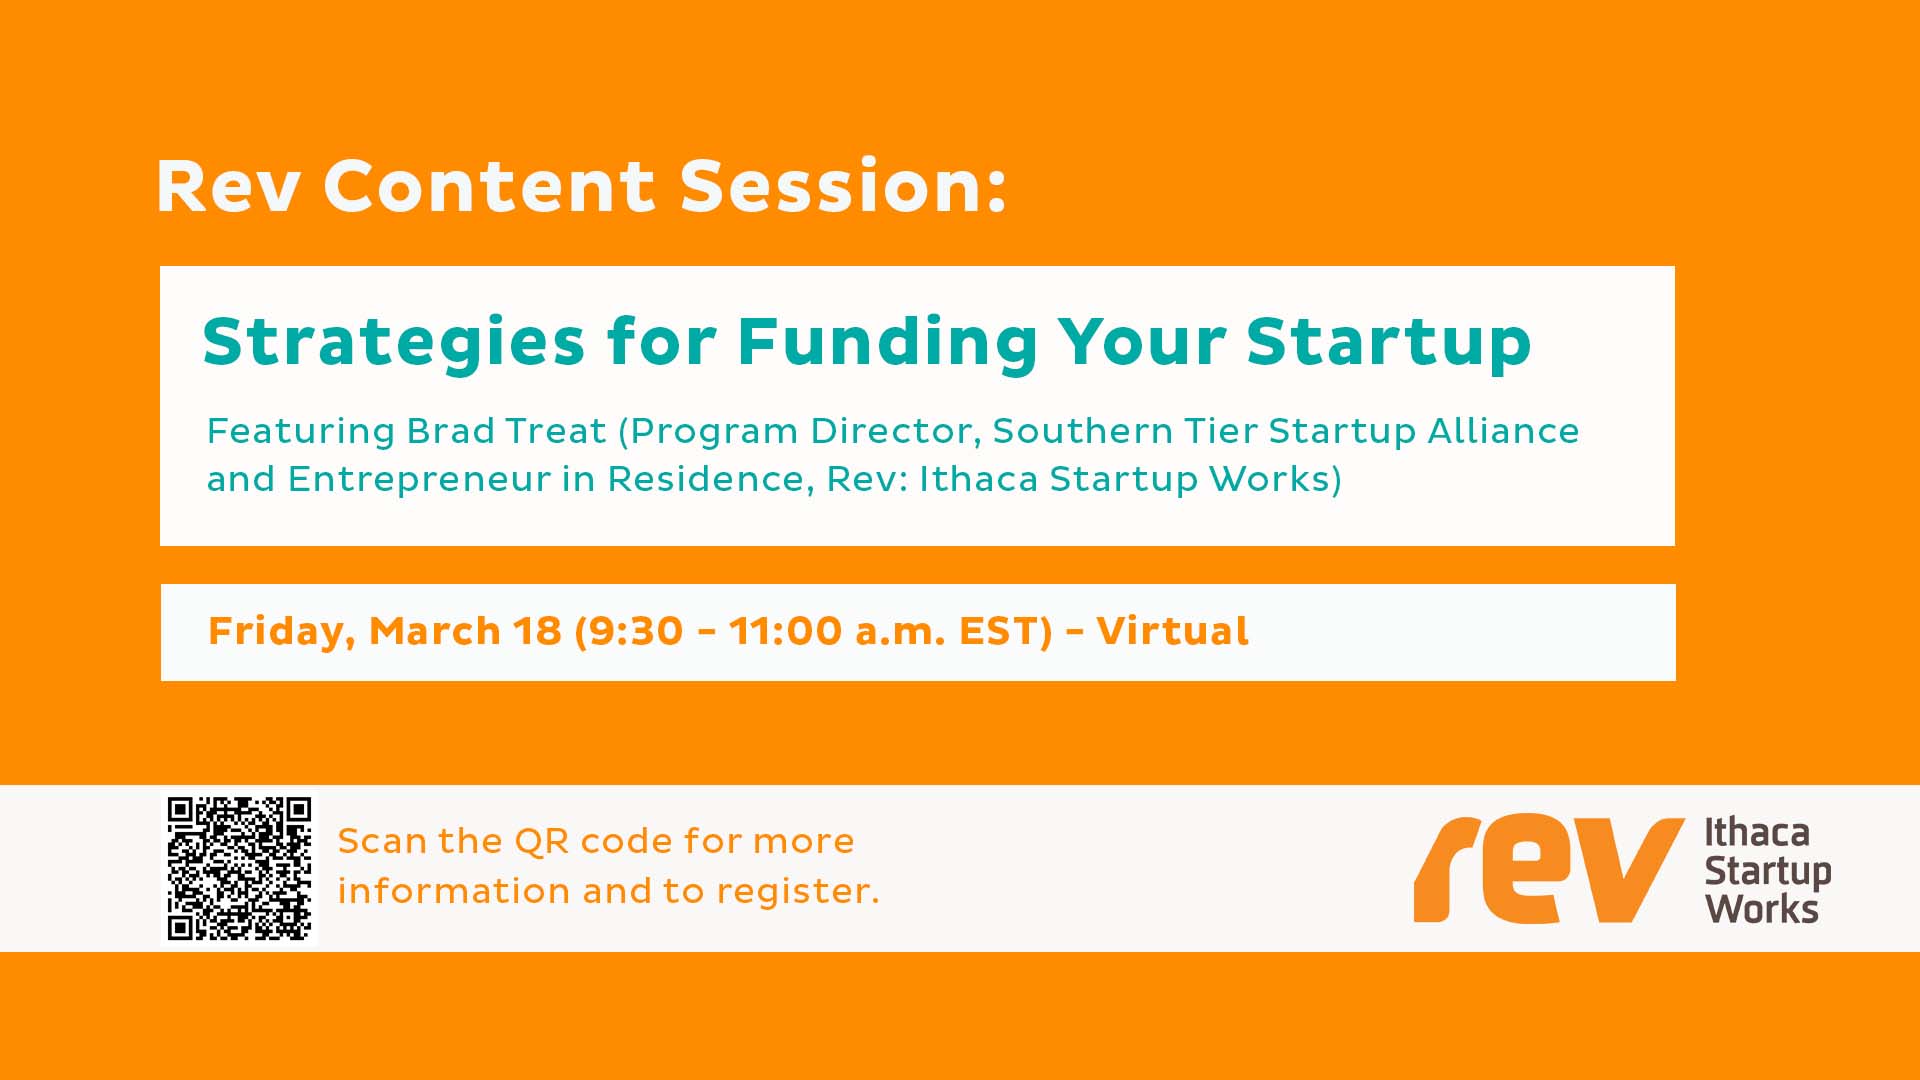 Rev Content Session: Strategies for Funding Your Startup. Featuring Brad Treat (Program Director, Southern Tier Startup Alliance and Entrepreneur in Residence, Rev: Ithaca Startup Works). Friday, March 18 (9:30-11:00 a.m. EST). Virtual.